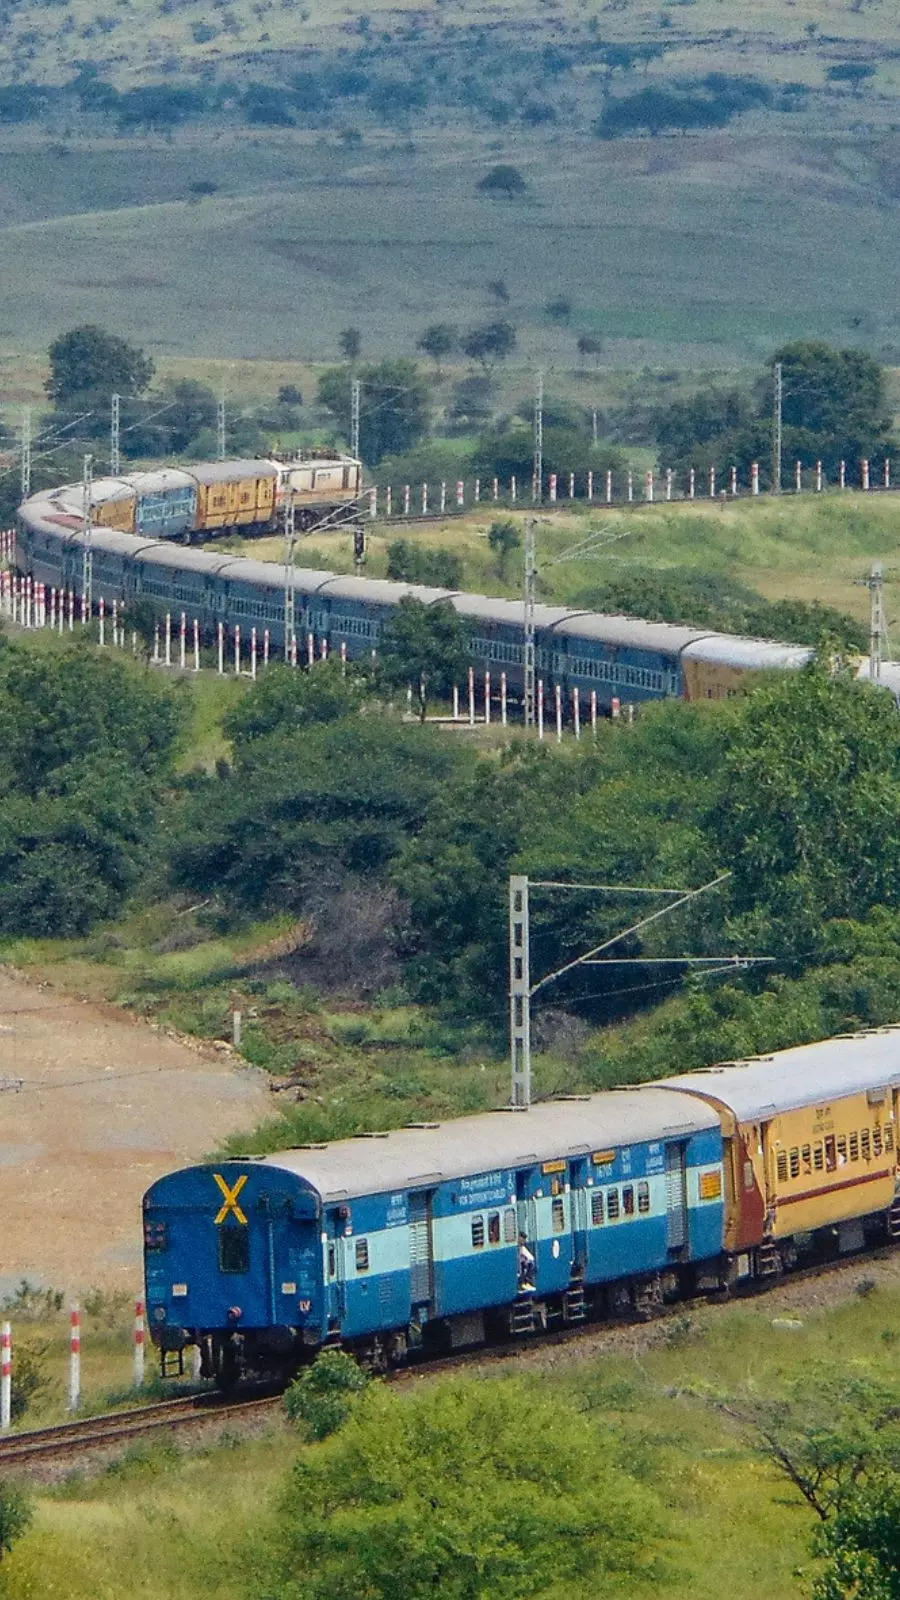 Biggest upcoming projects of Indian Railways